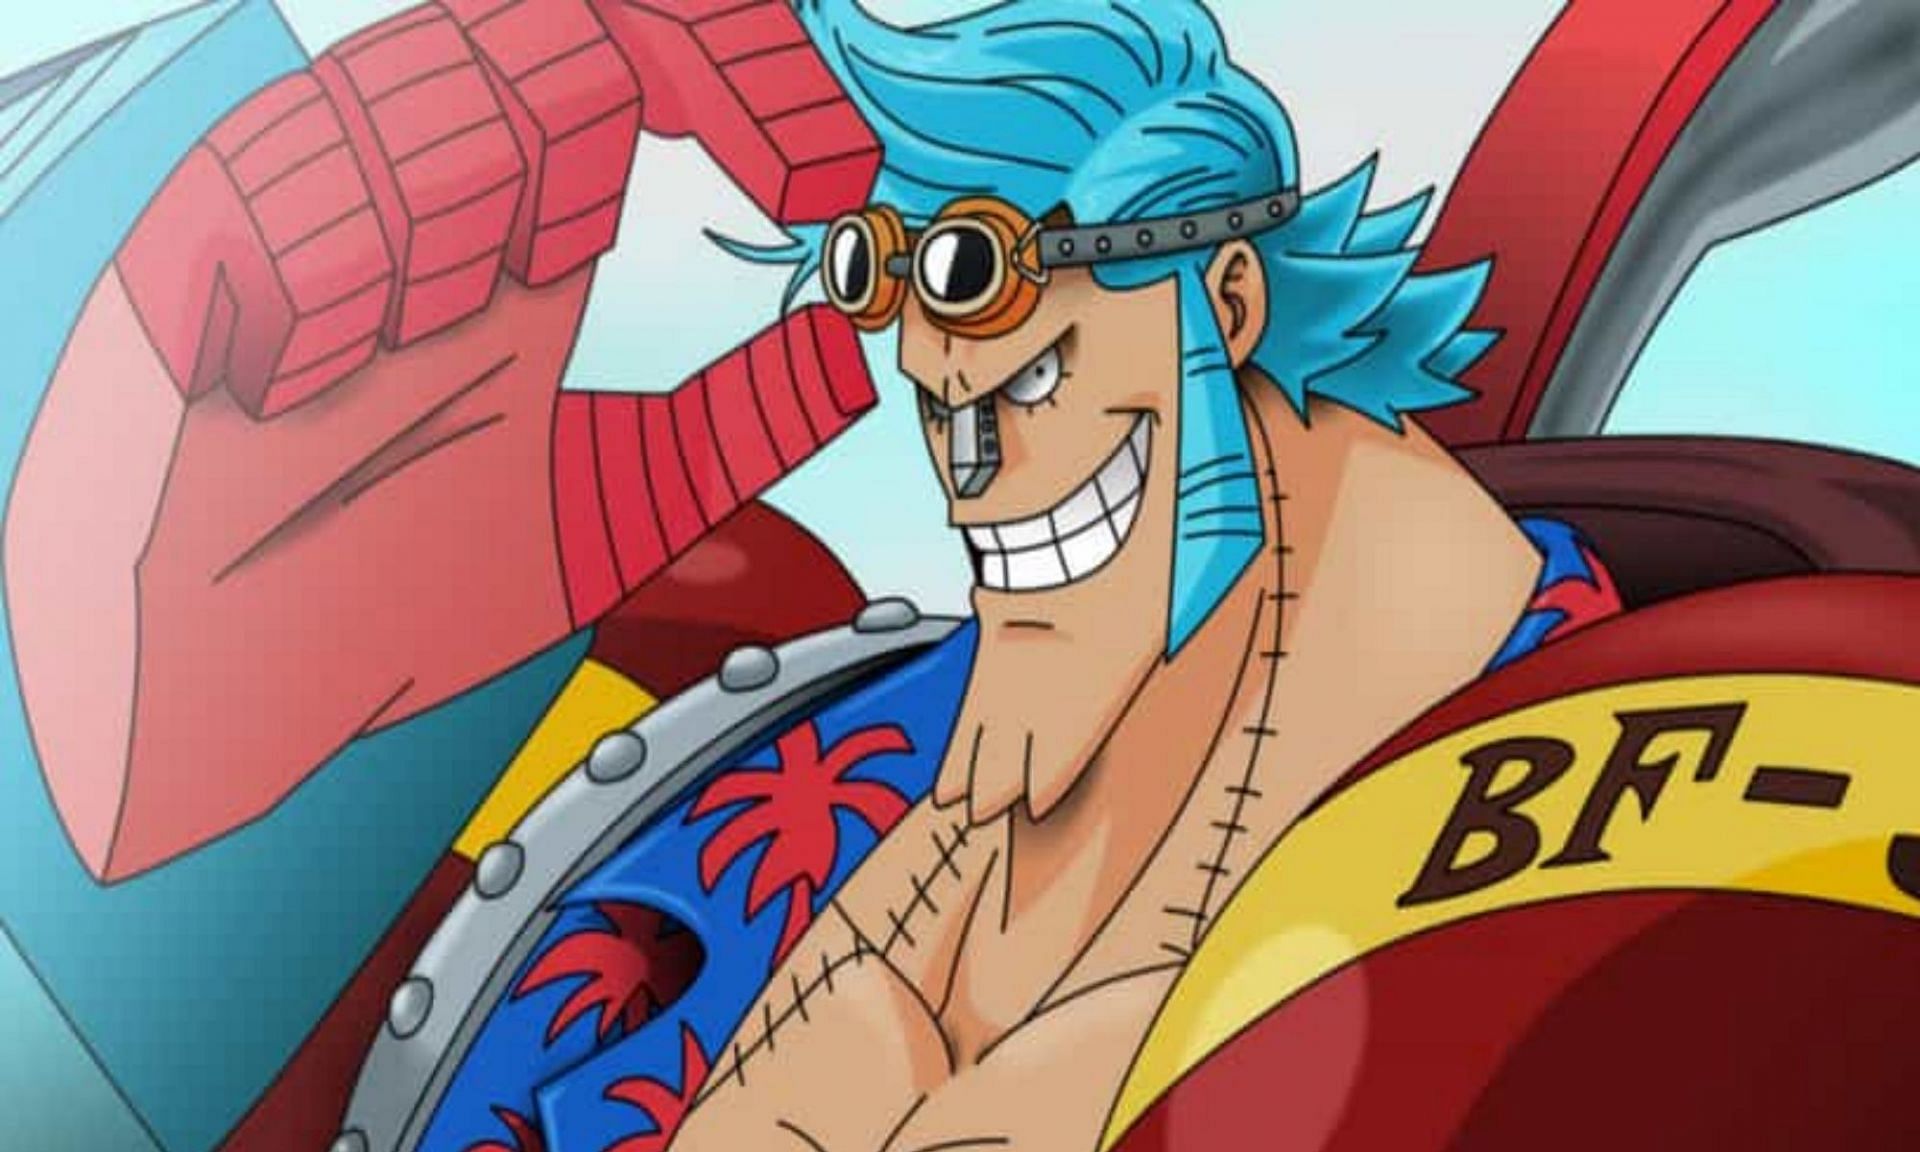 Franky likes what he sees in this chapter